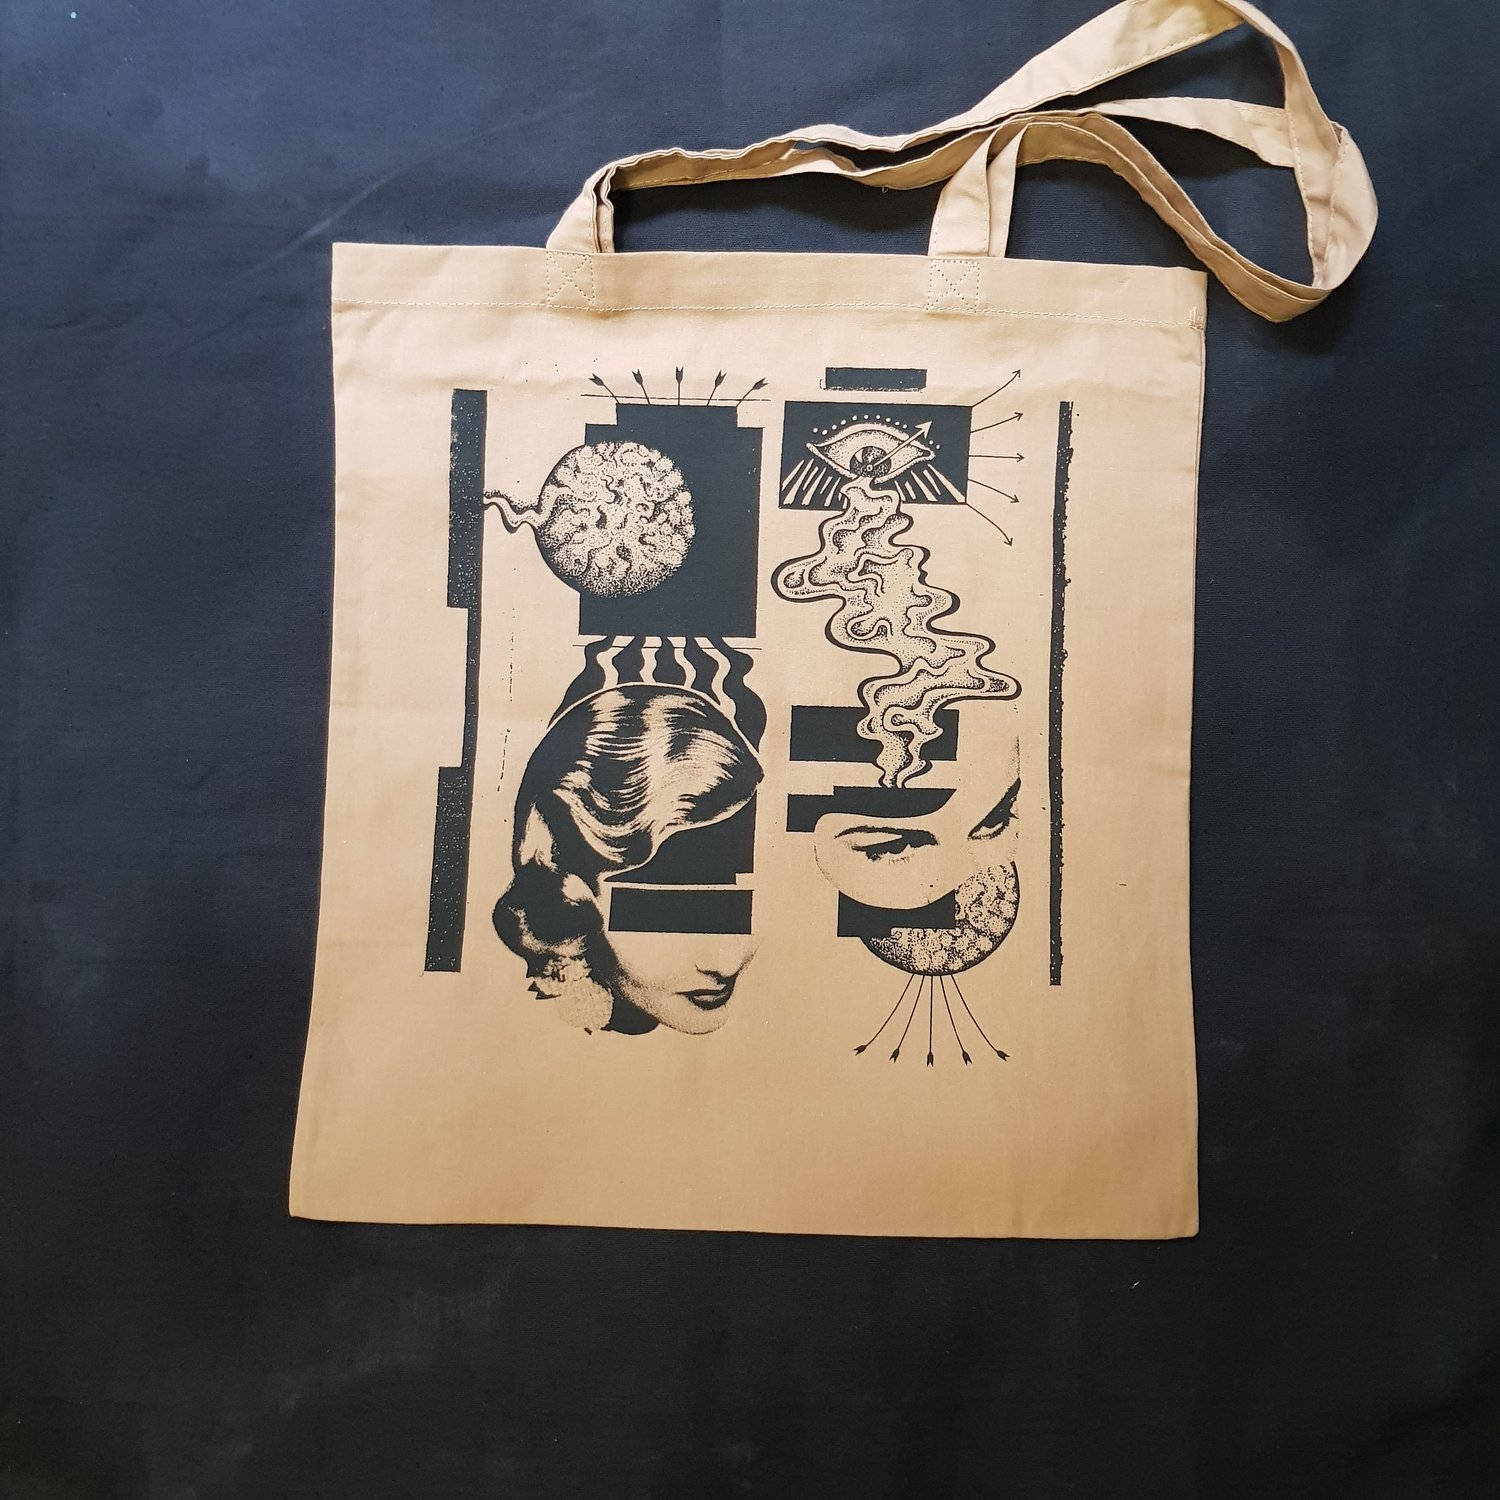 Tote bags:  "Brain on fire"